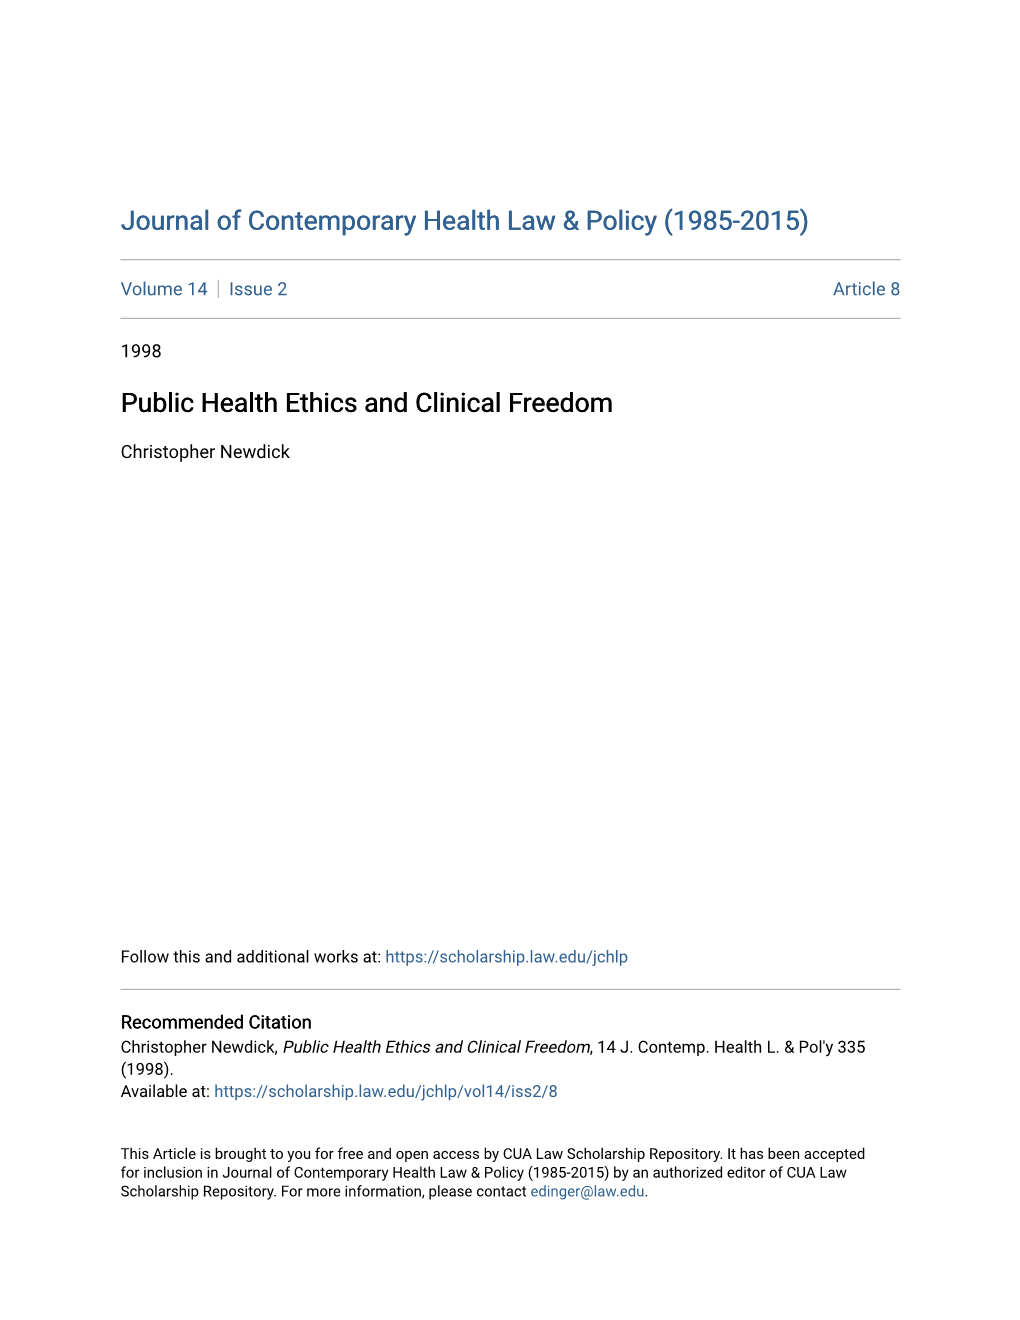 Public Health Ethics and Clinical Freedom